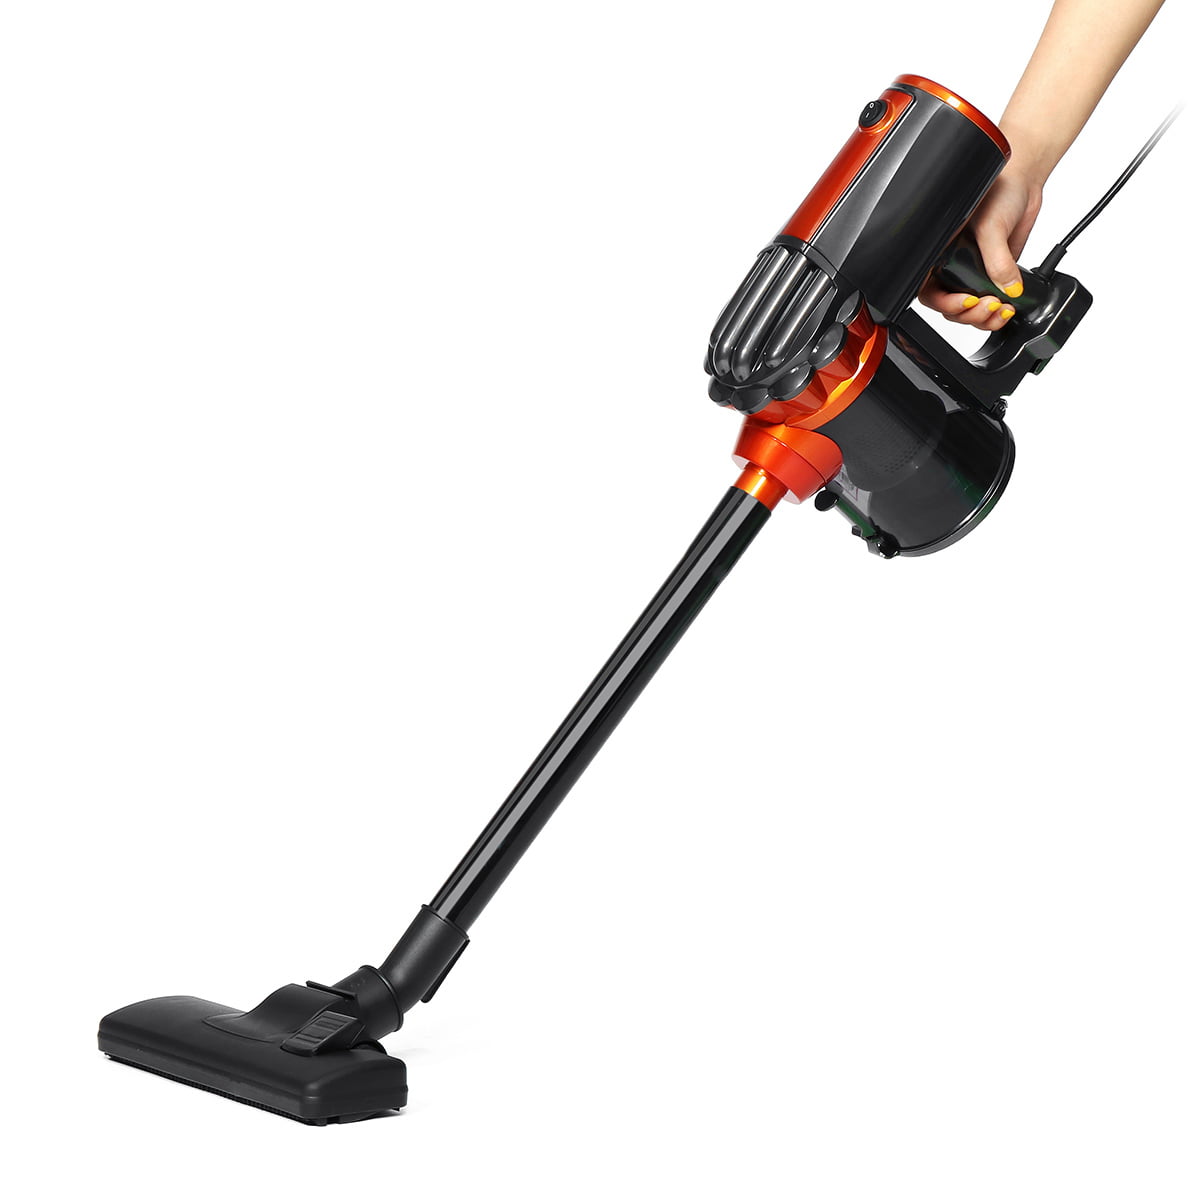 Lightweight, Corded Stick Vacuum Cleaner 2 in 1 Powerful Suction Stick Handheld Vacuum for Home